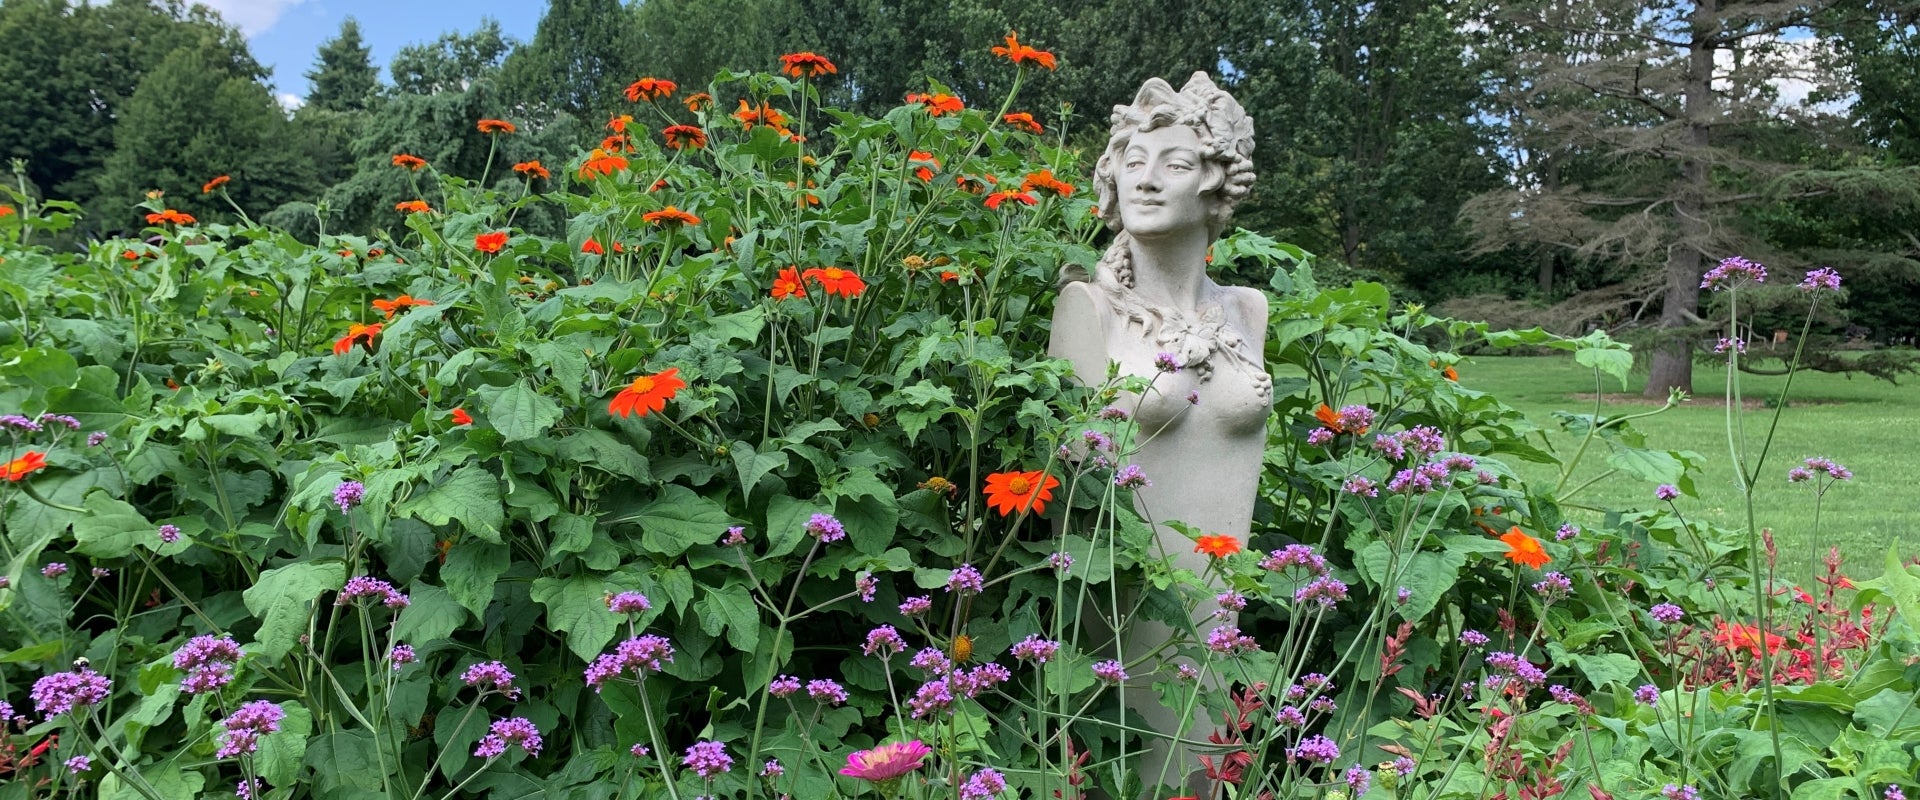 A statue of a Greek nymph among orange and purple flowers in bloom. 